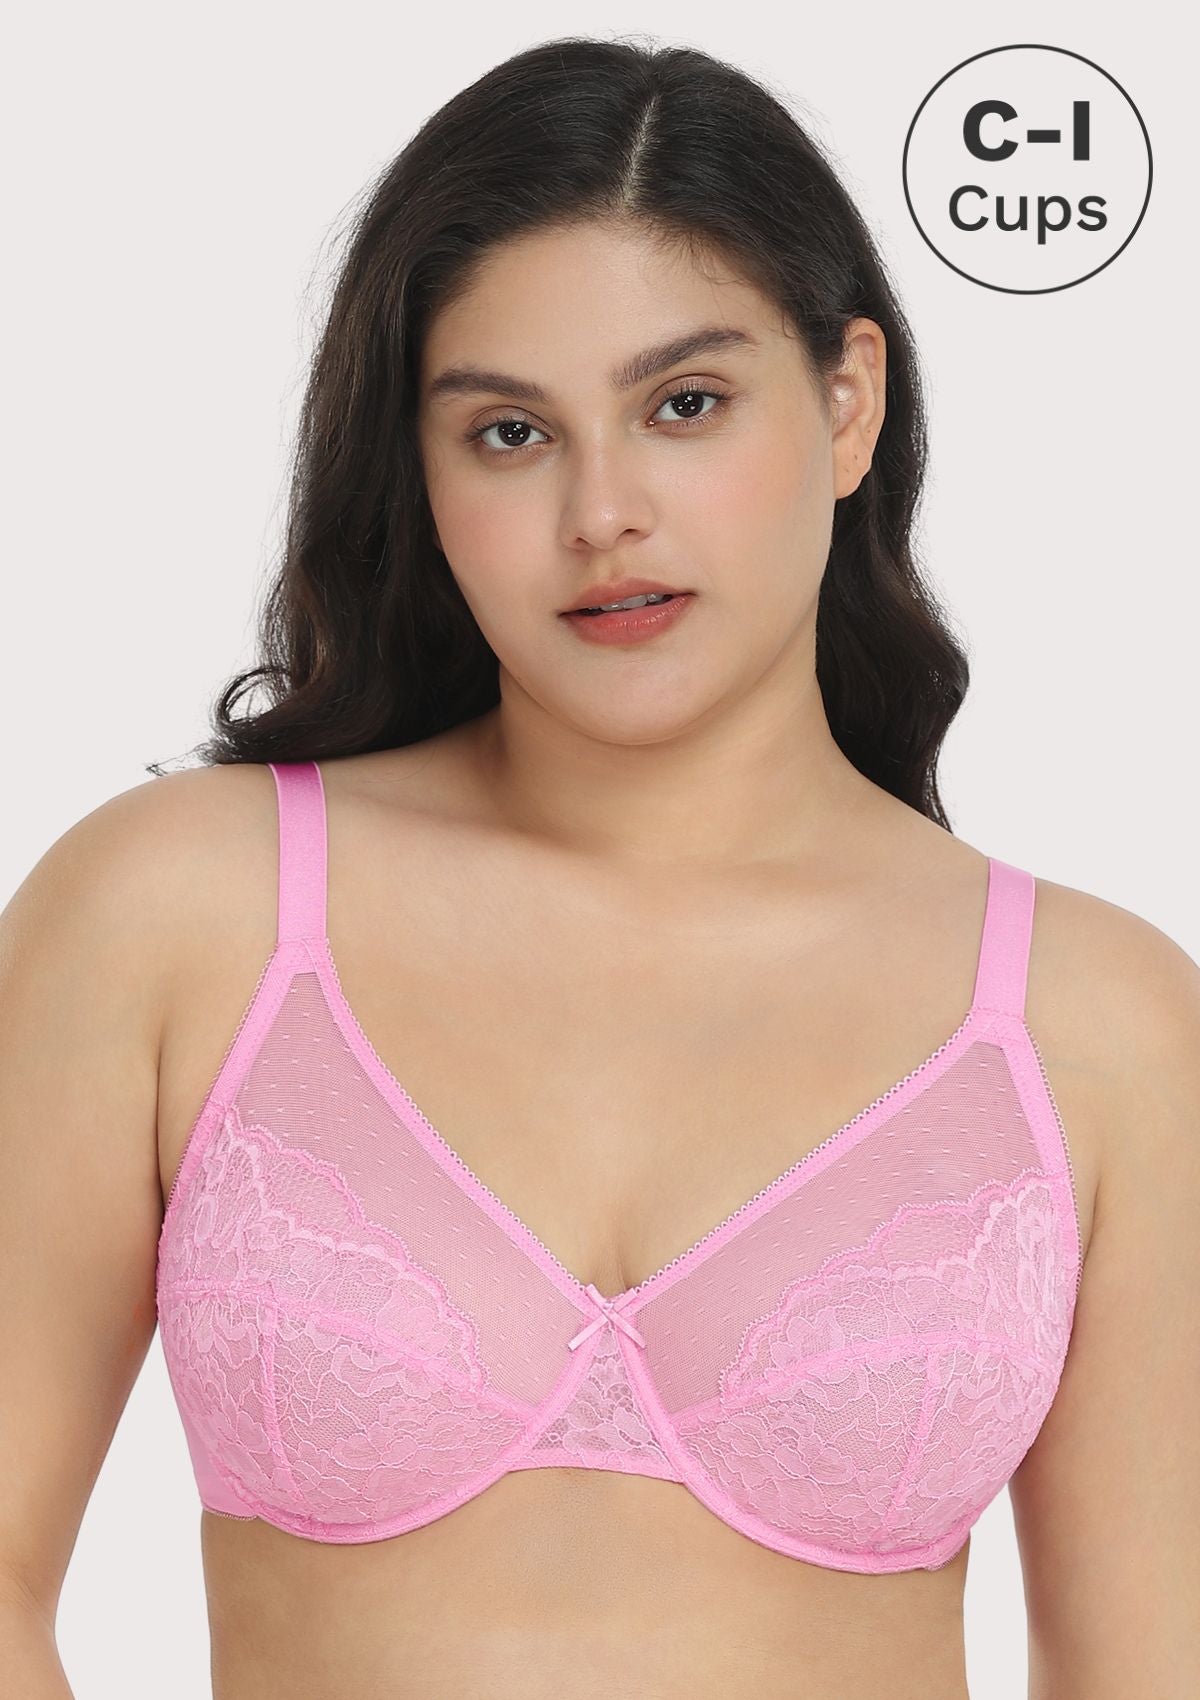 HSIA Sunflower Lace Bra and Panty: Cute Plus Size Comfort Bra